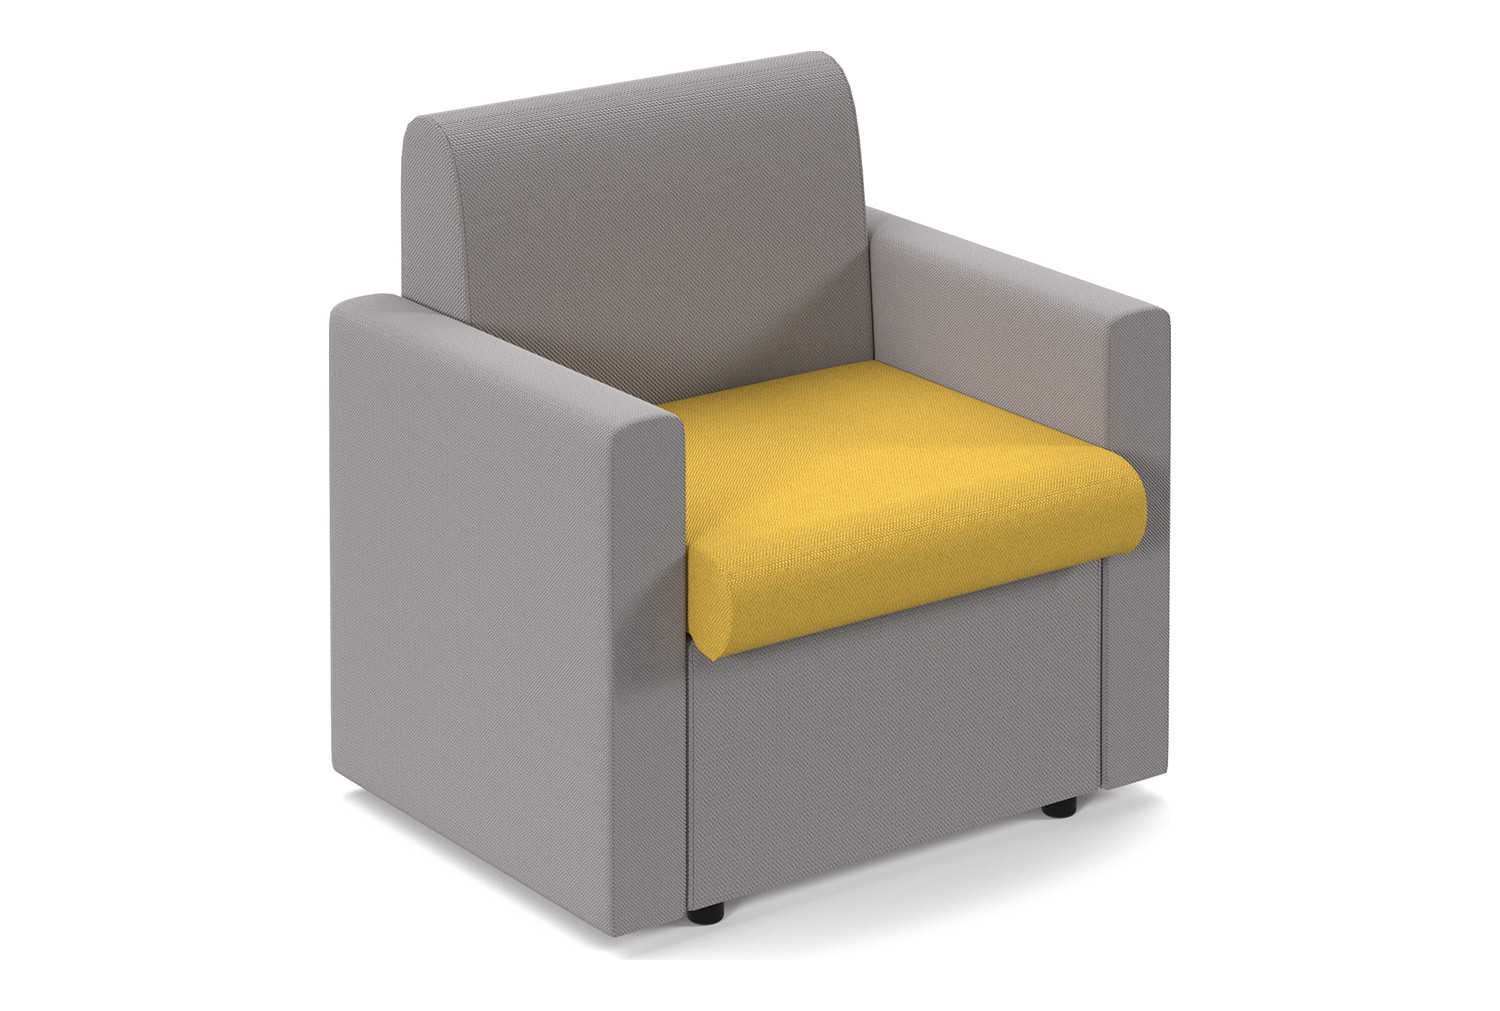 Portland 2 Tone Modular Soft Seating, Armchair, Lifetime Yellow Seat/Forecast Grey Back, Fully Installed